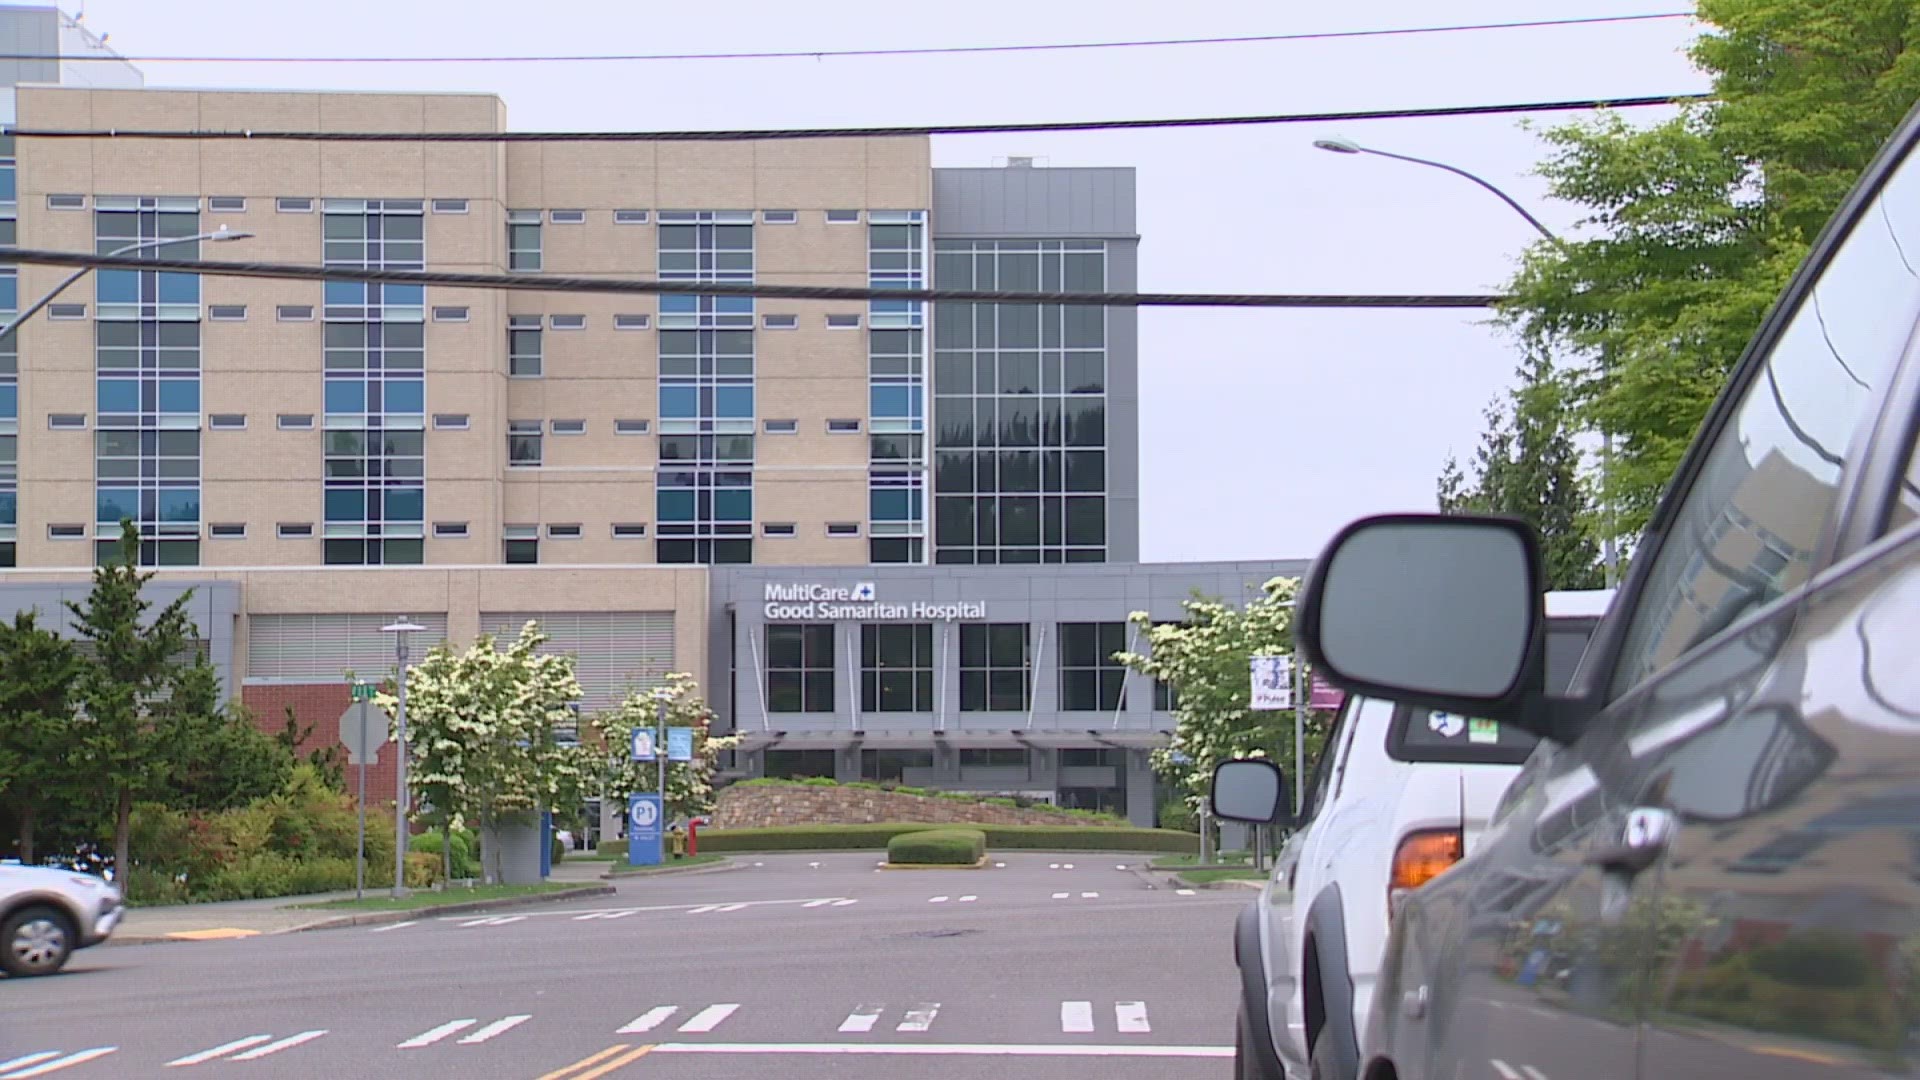 A foster parent left the child in a car outside MultiCare Good Samaritan Hospital in Puyallup for nine hours, according to police.